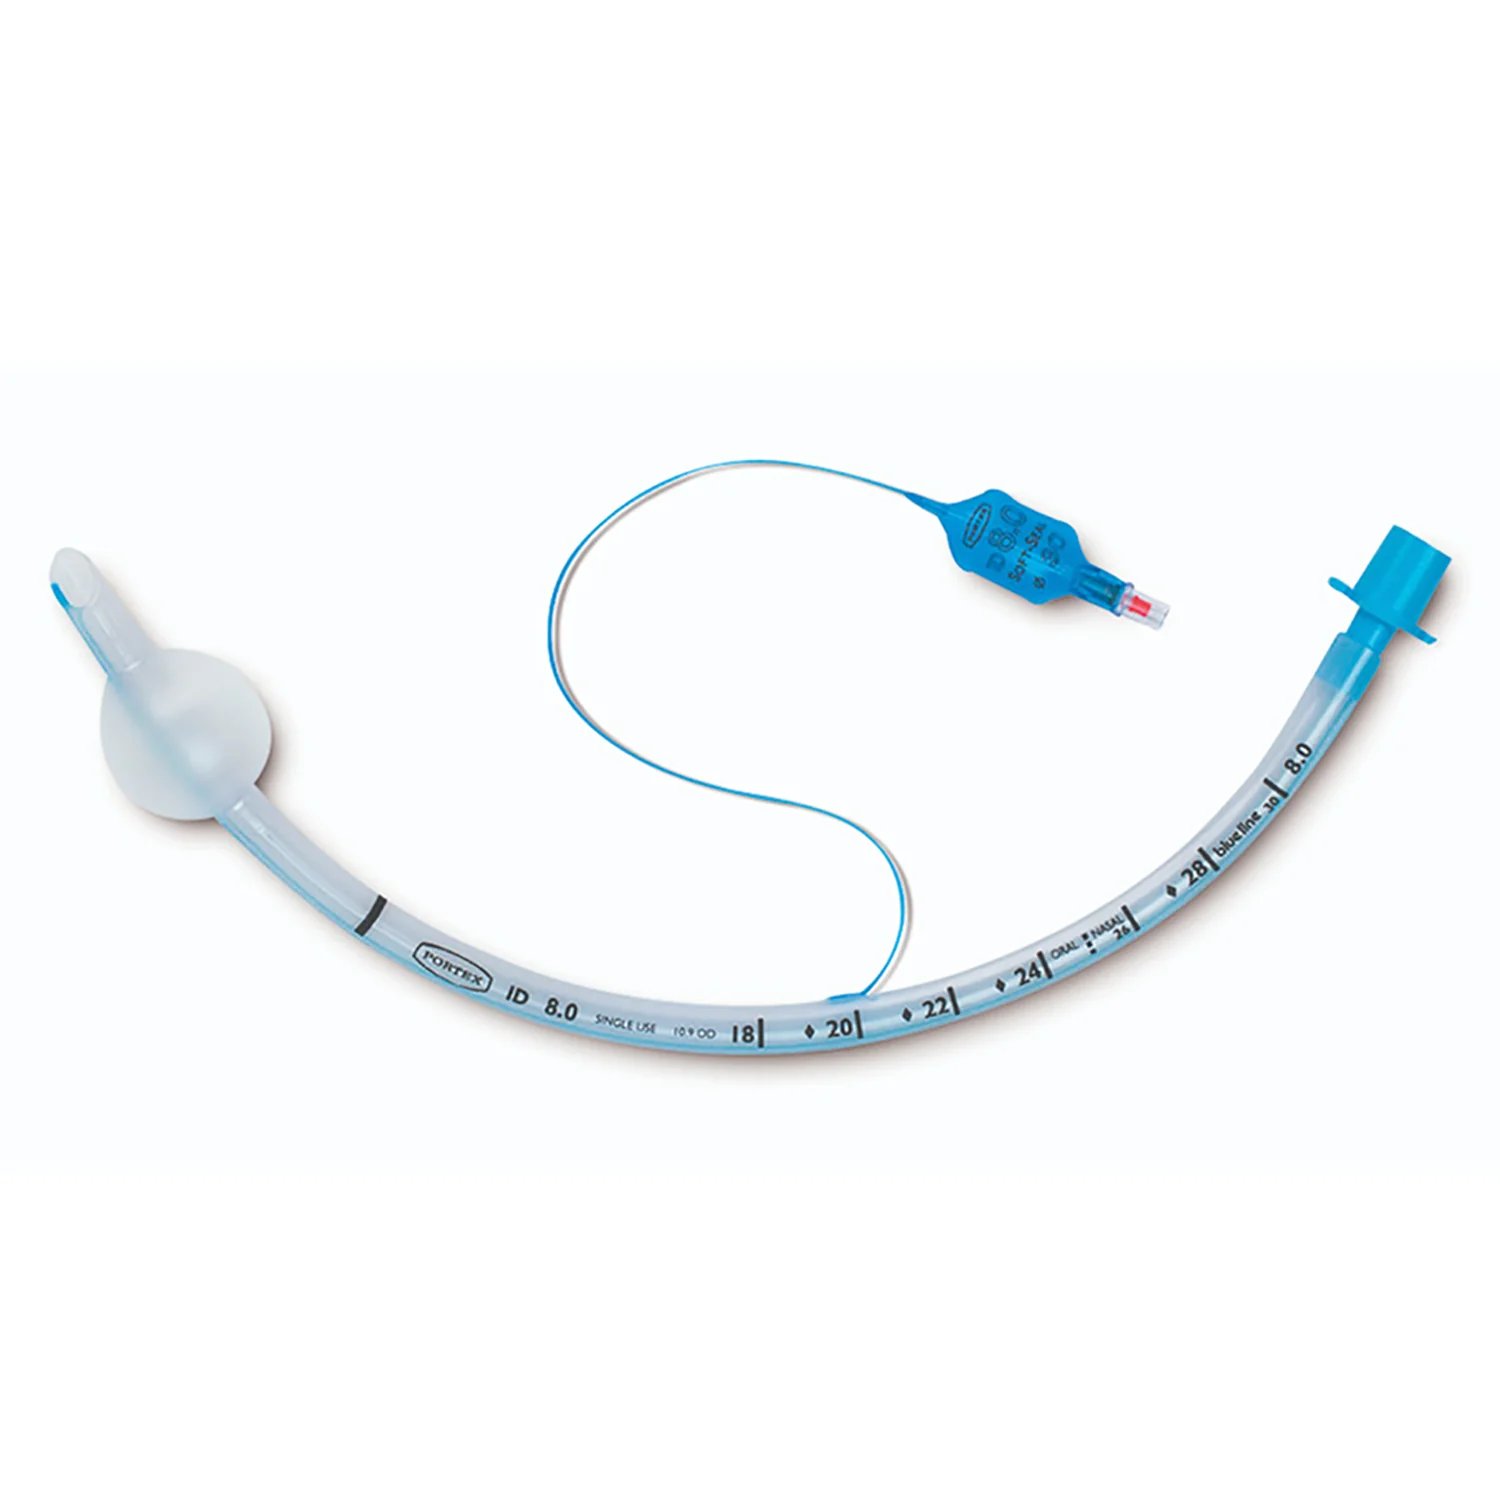 Portex Blue Line Endotracheal Tubes | Cuffed Oral/Nasal | Siliconized PVC | Size 6.0mm | Pack of 20 (1)